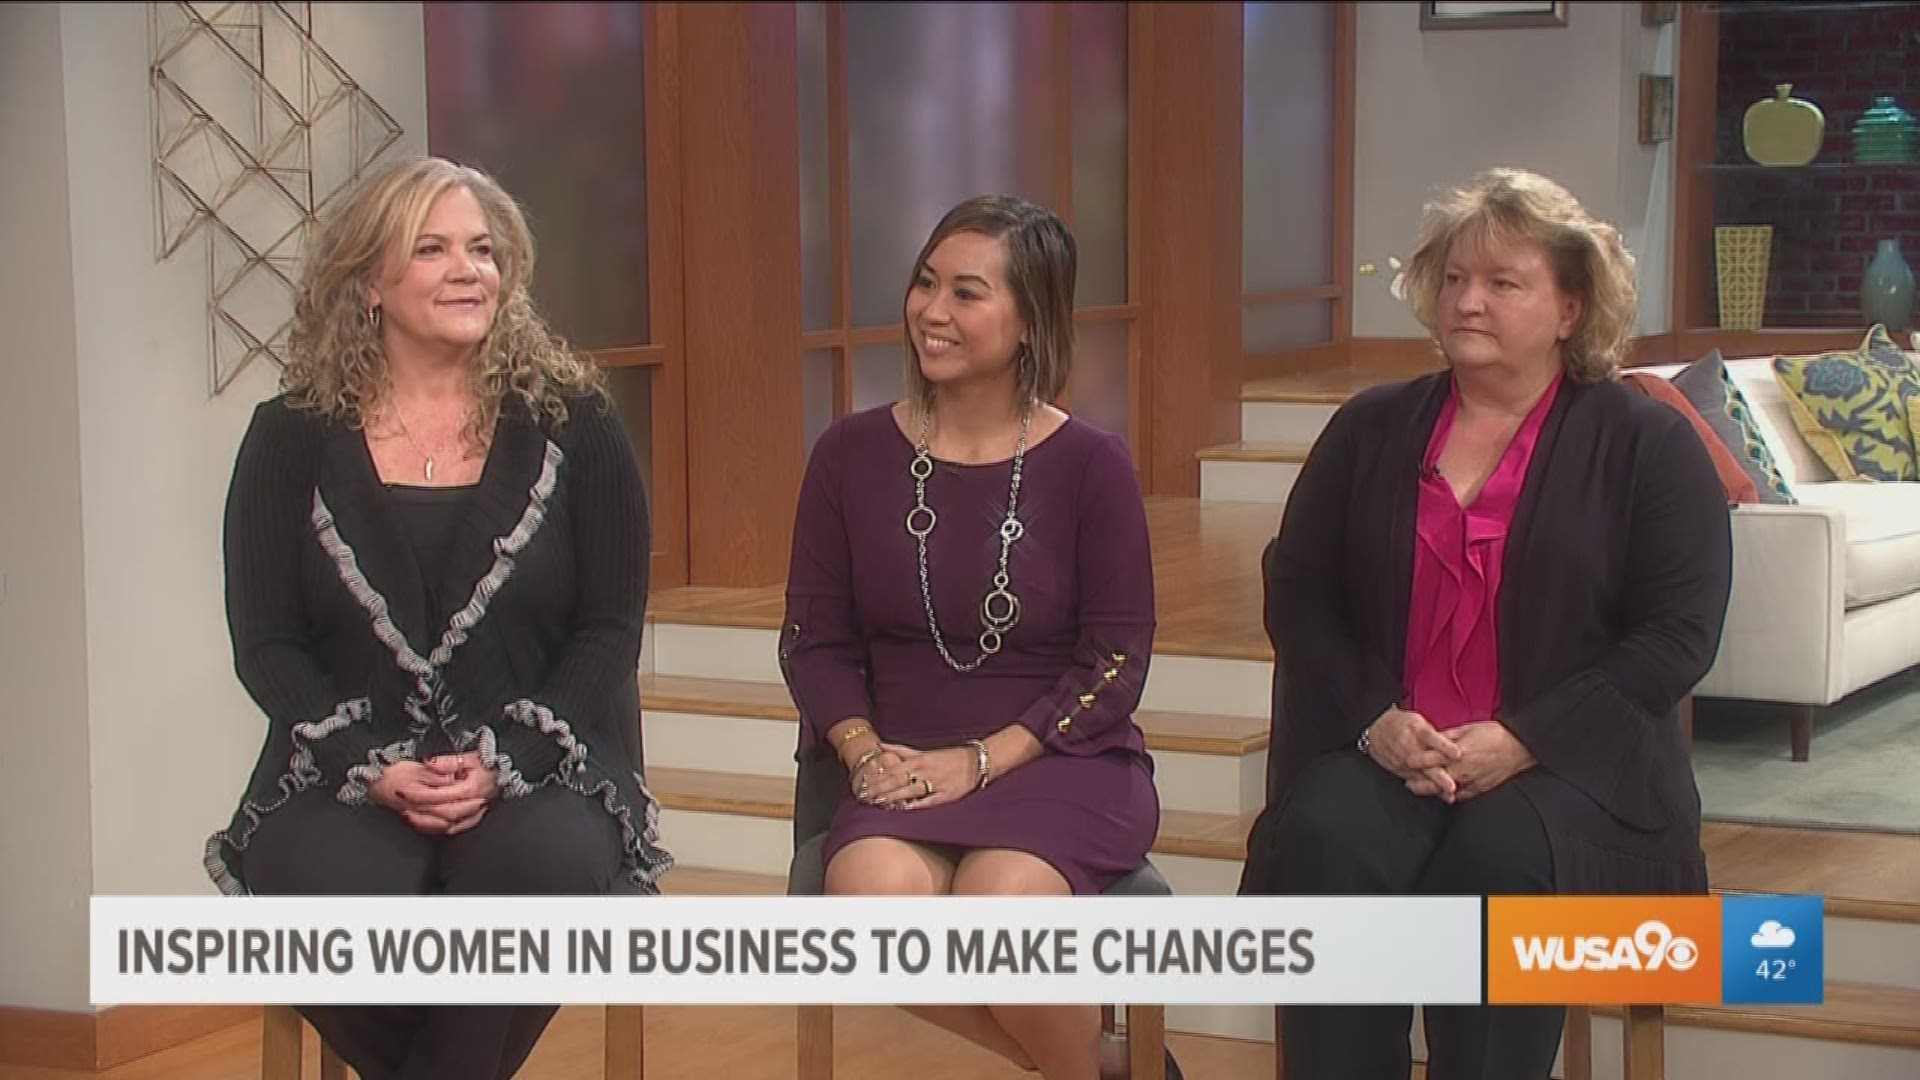 Donna Fortier, Joni Rae, and Laura d’All talk about the Virginia Women's Business Conference taking place on Dec. 6 at the Westfields Marriott in Chantilly, VA.